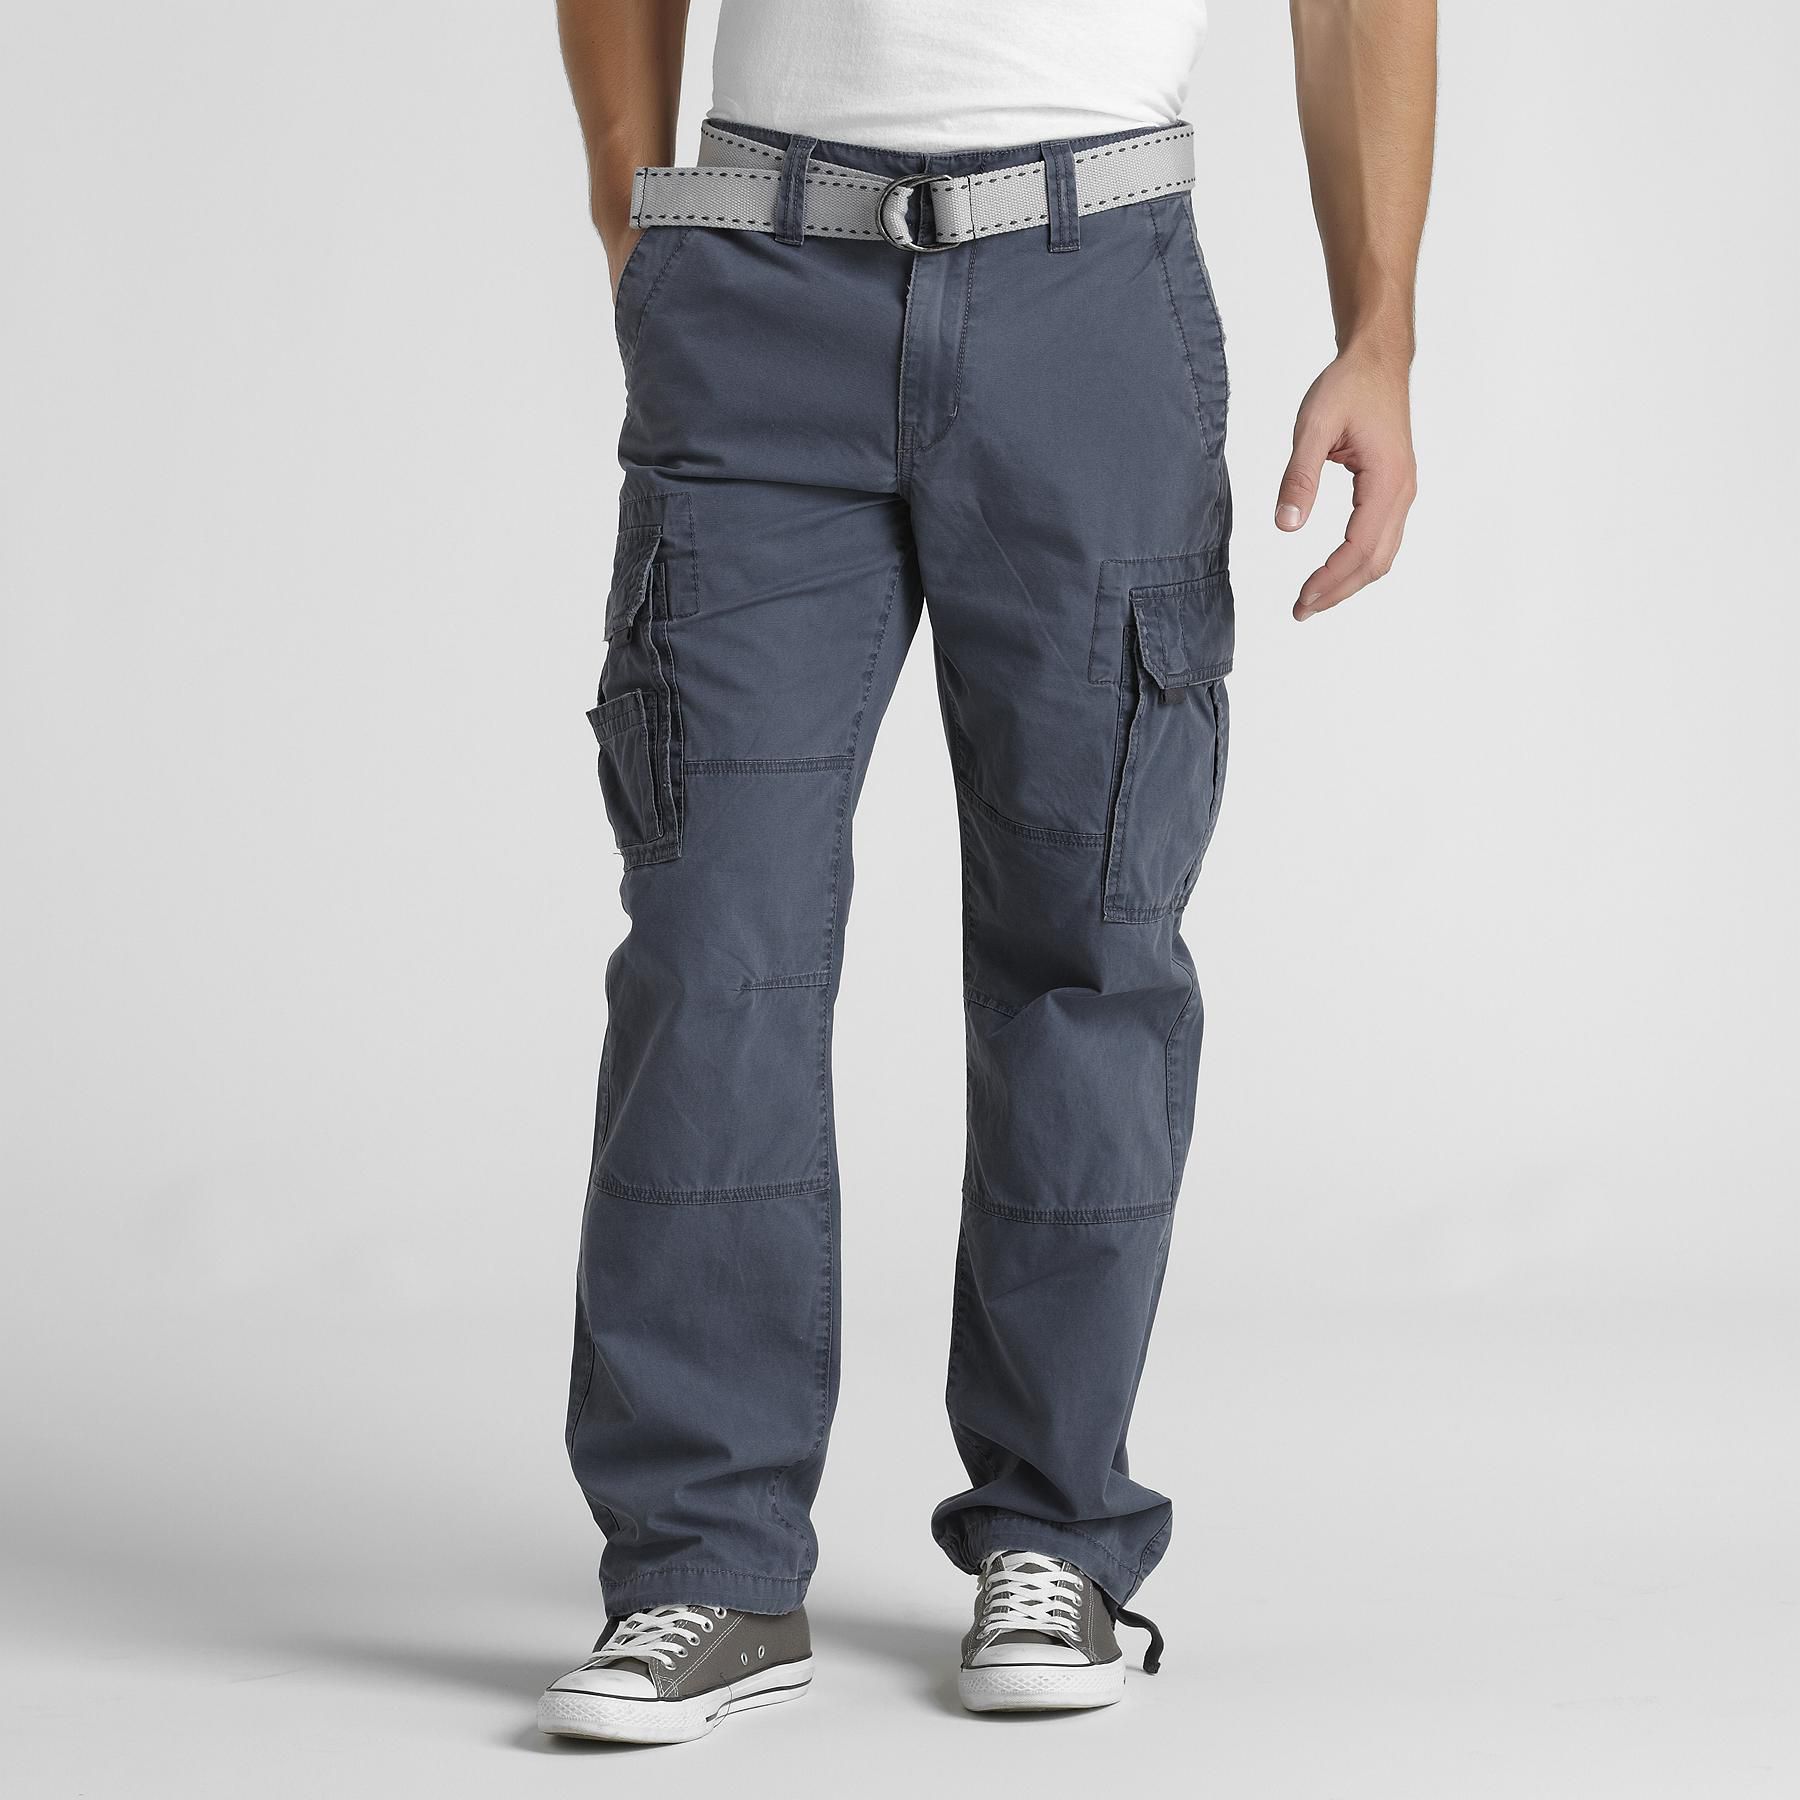 Roebuck & Co. Young Men's Belted Cargo Pants